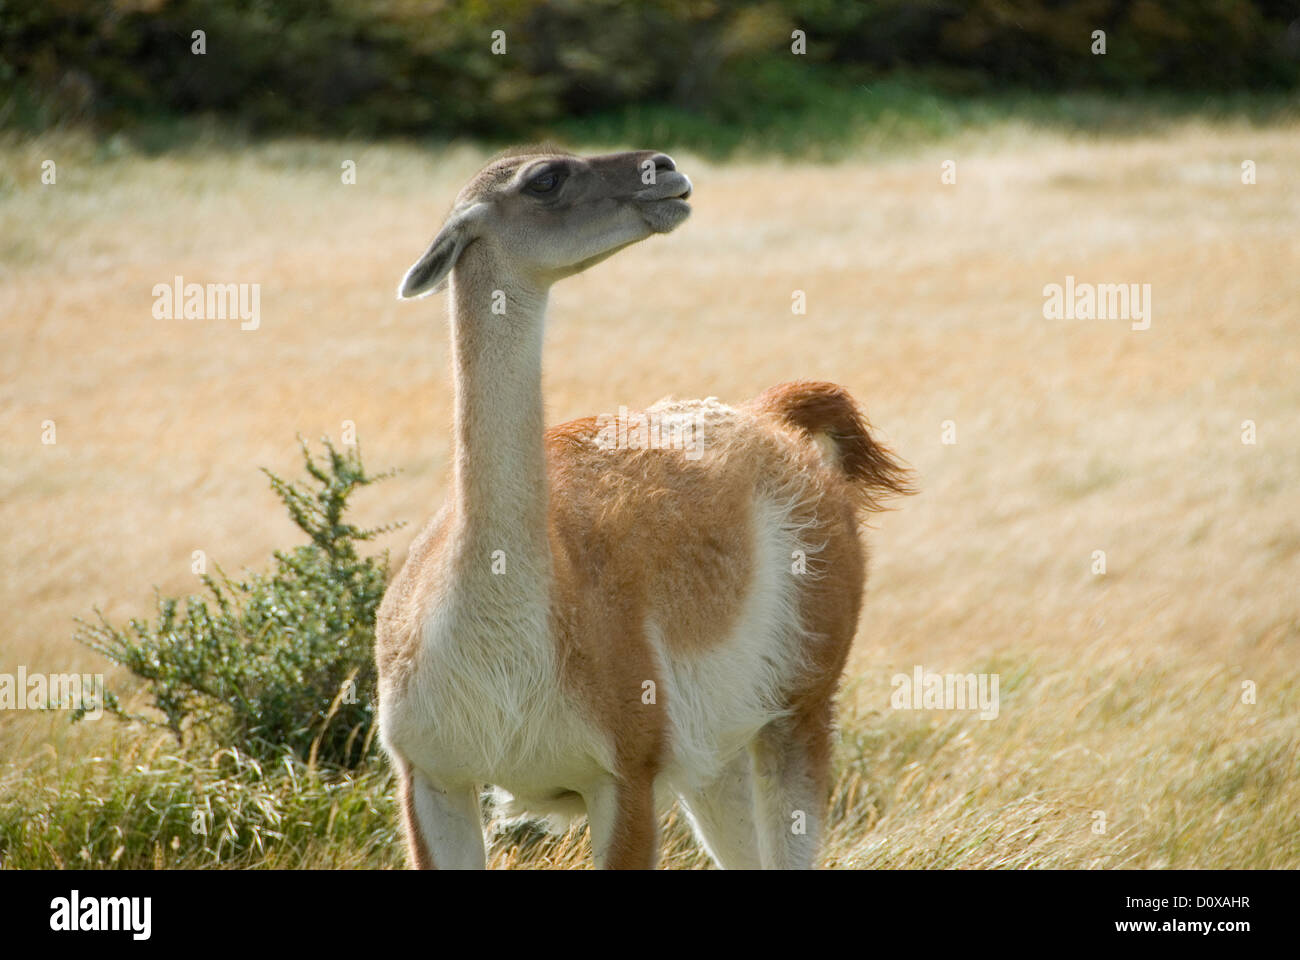 Guanaco, Torres Del Paine National Park, Patagonia, Chile. Stock Photo